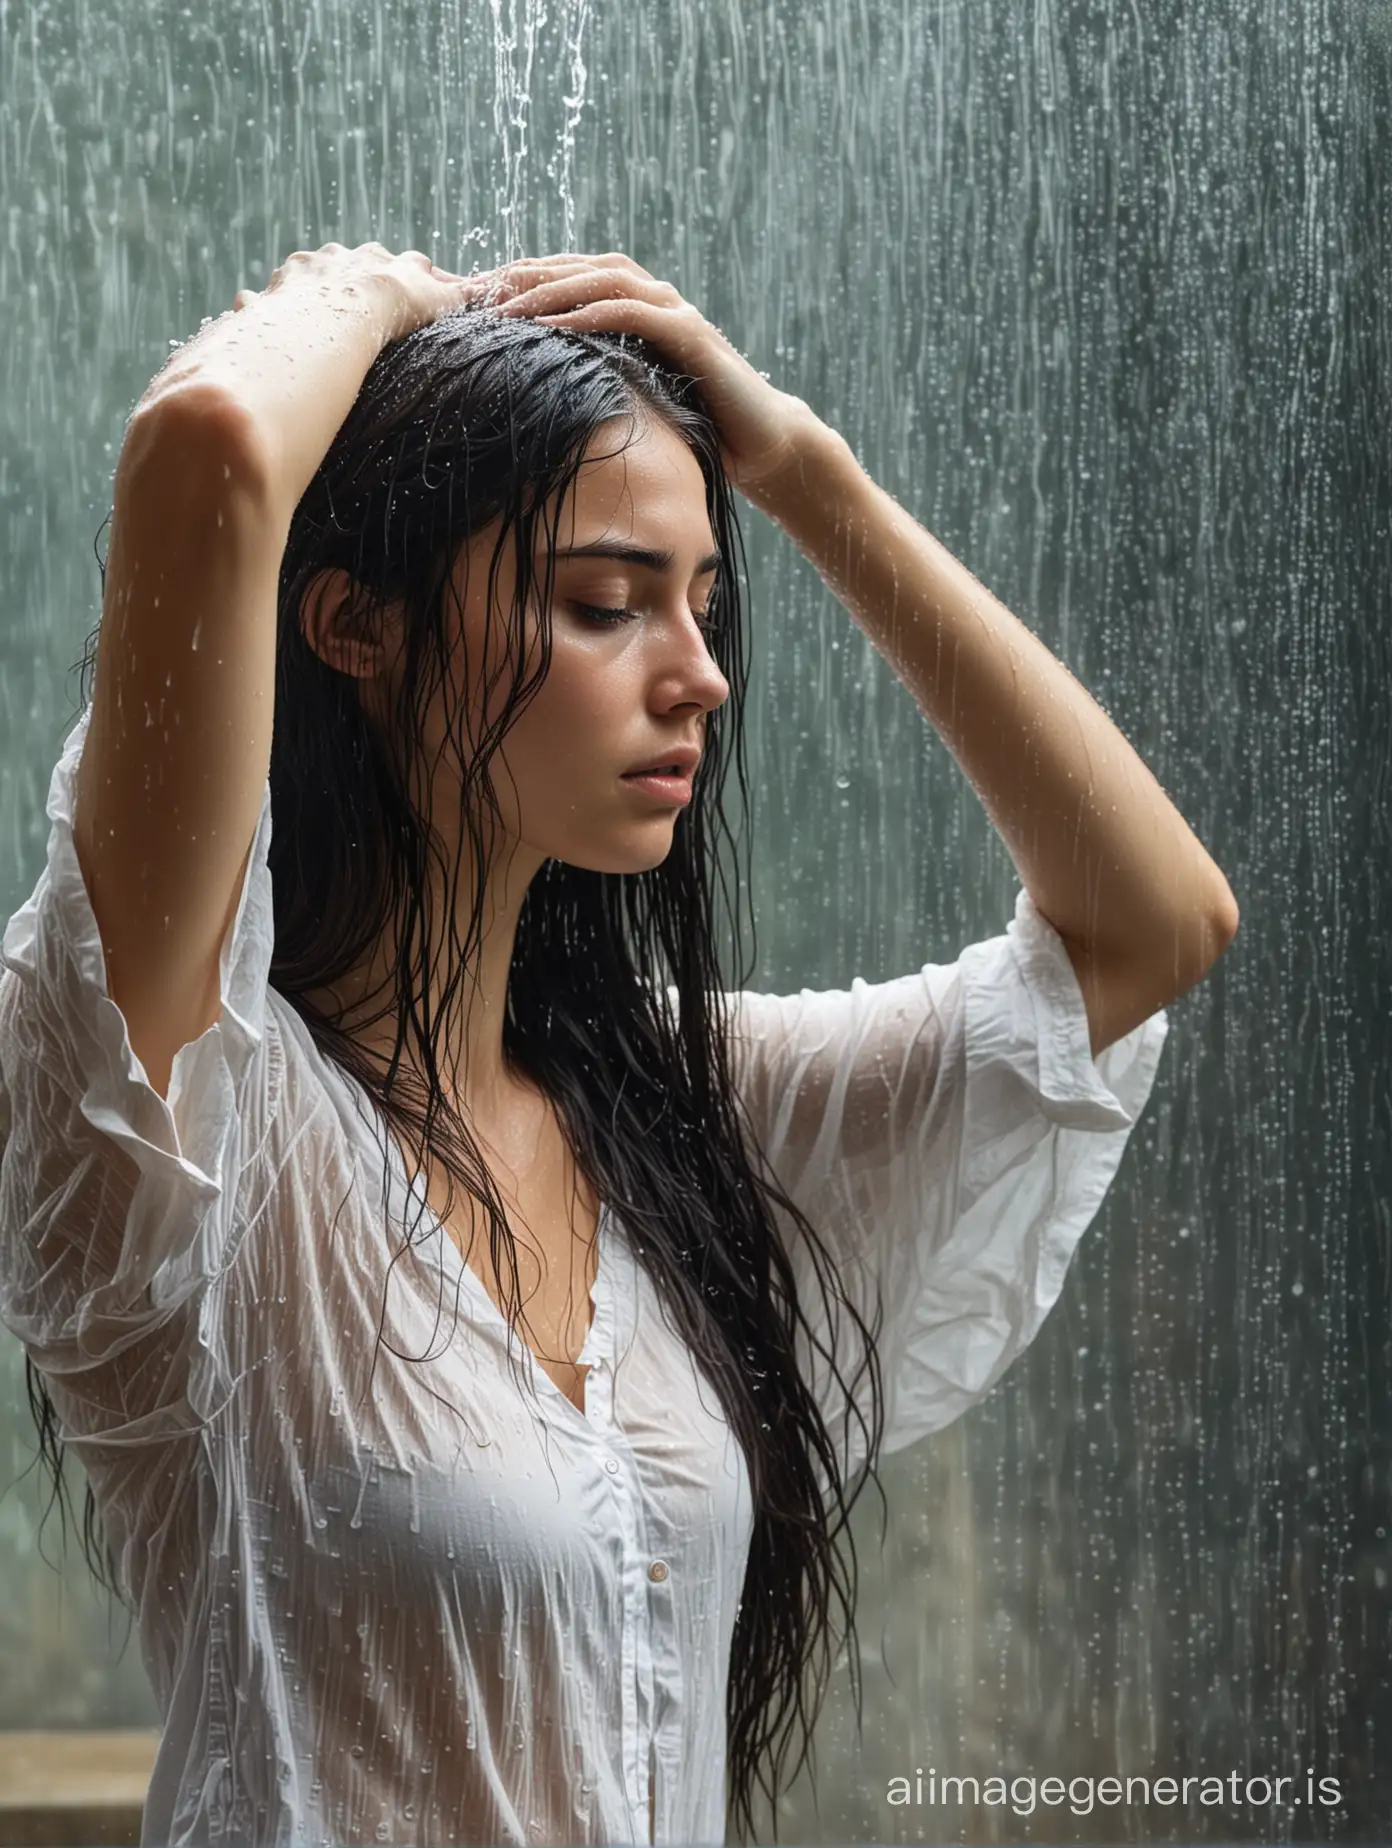 The girl with long dark hair and a thin wet shirt stands pressing her forehead against the glass, water streaming down.